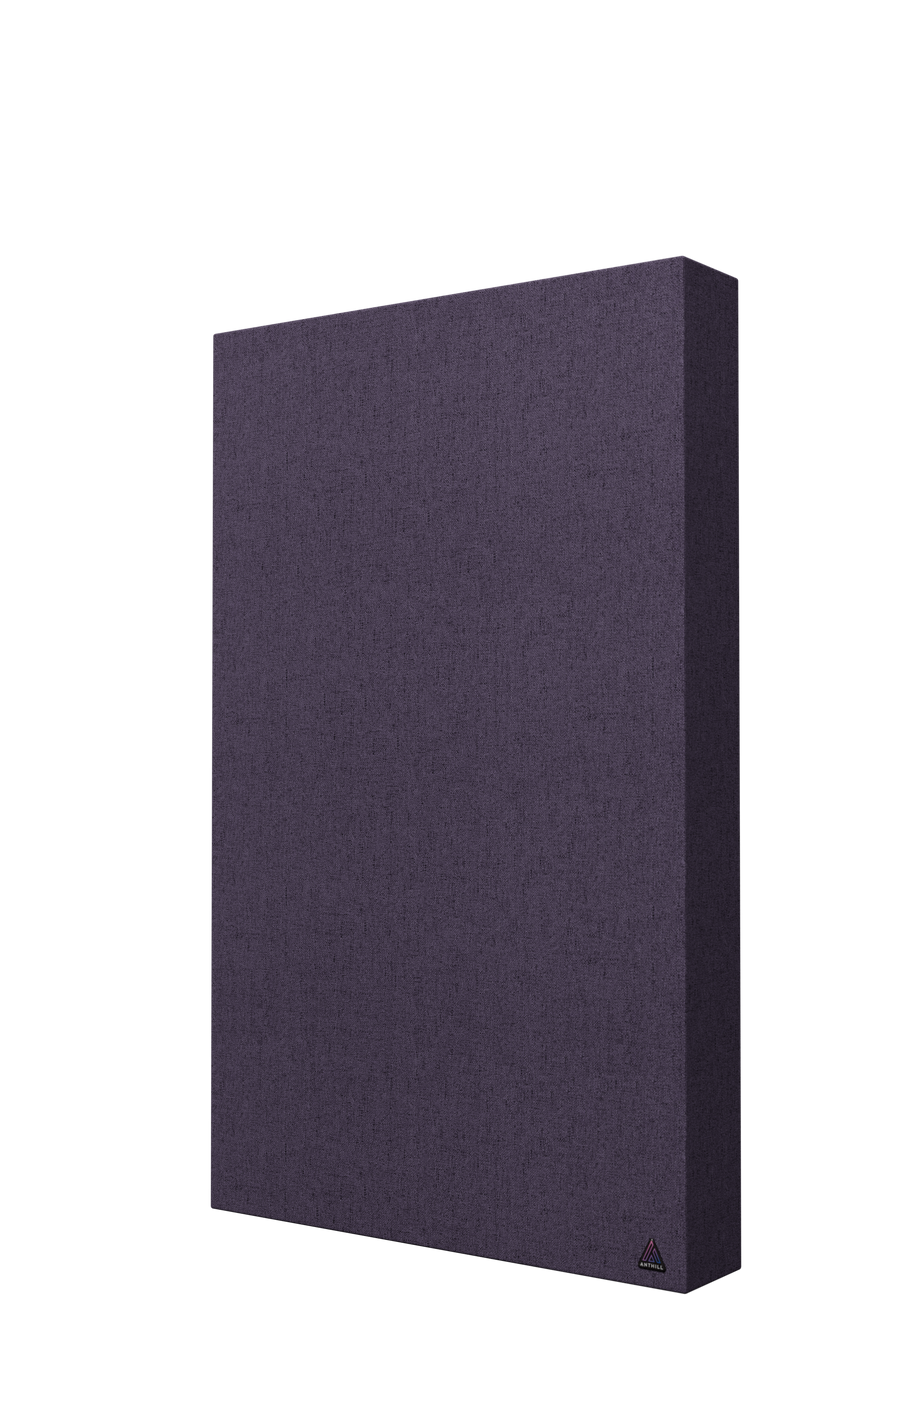 Anthill PRO Broadband Absorber / Acoustic Panel  purple